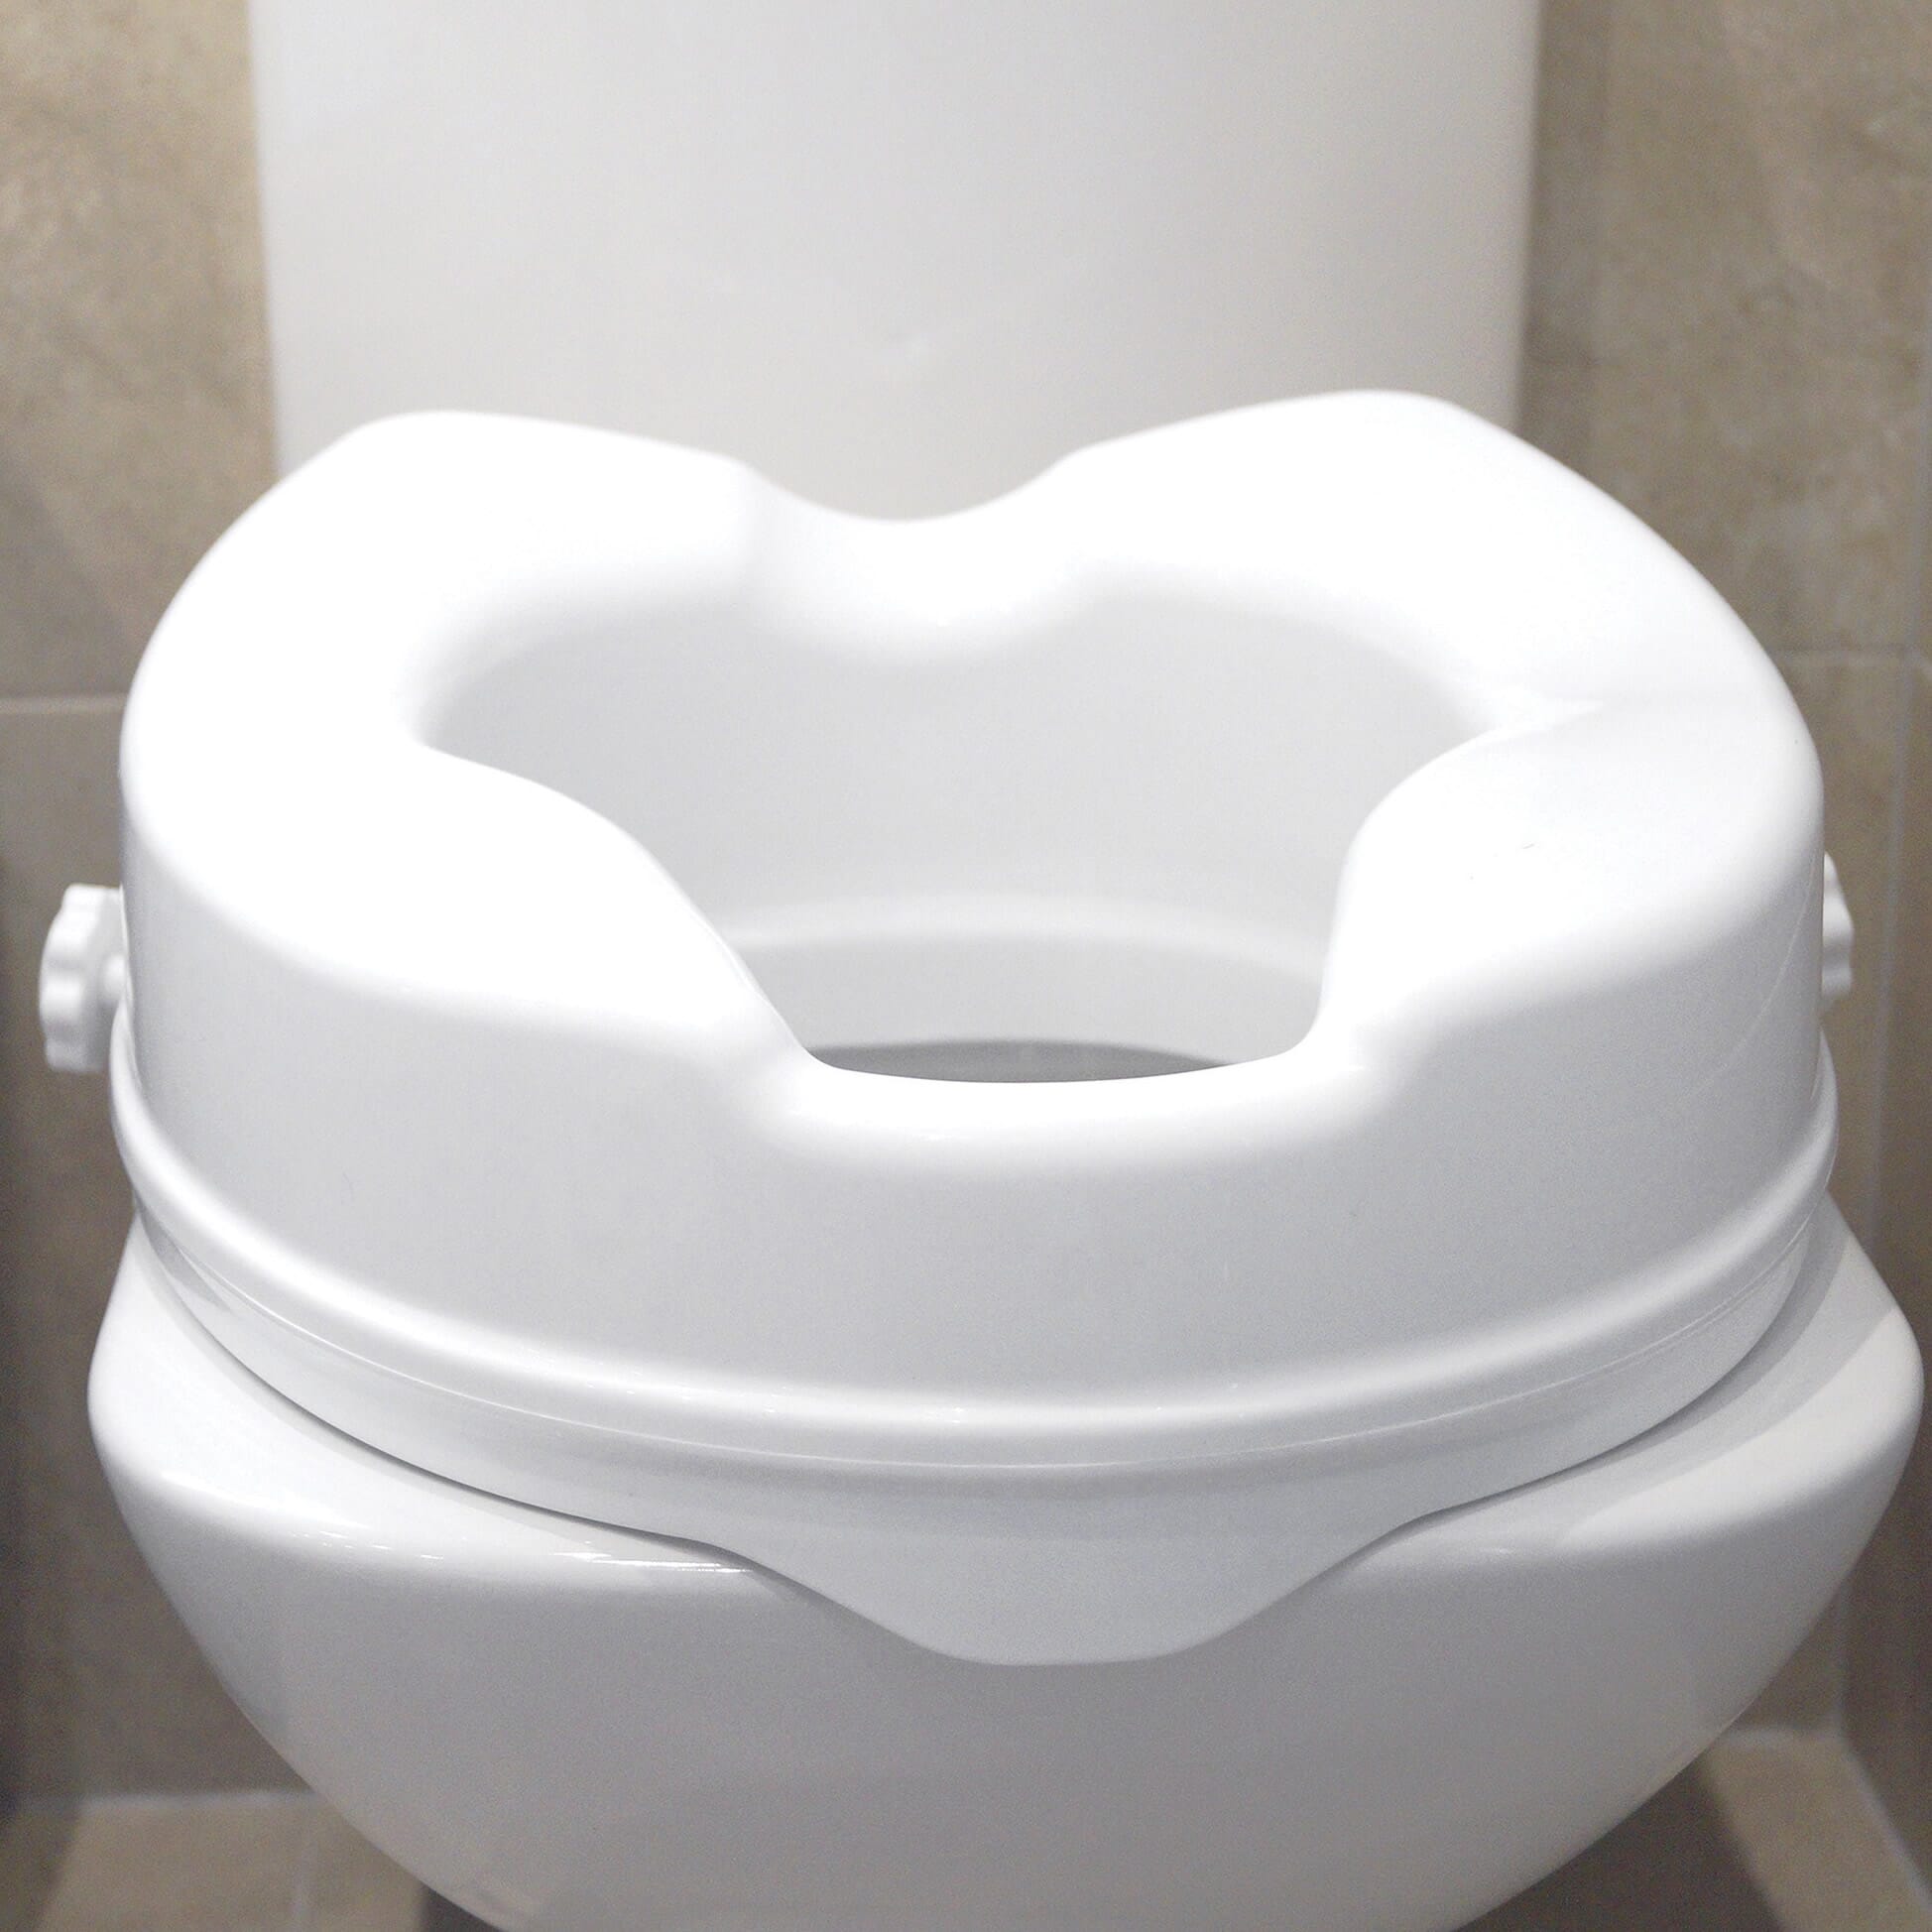 View Raised Toilet Seat 4 inch seat information